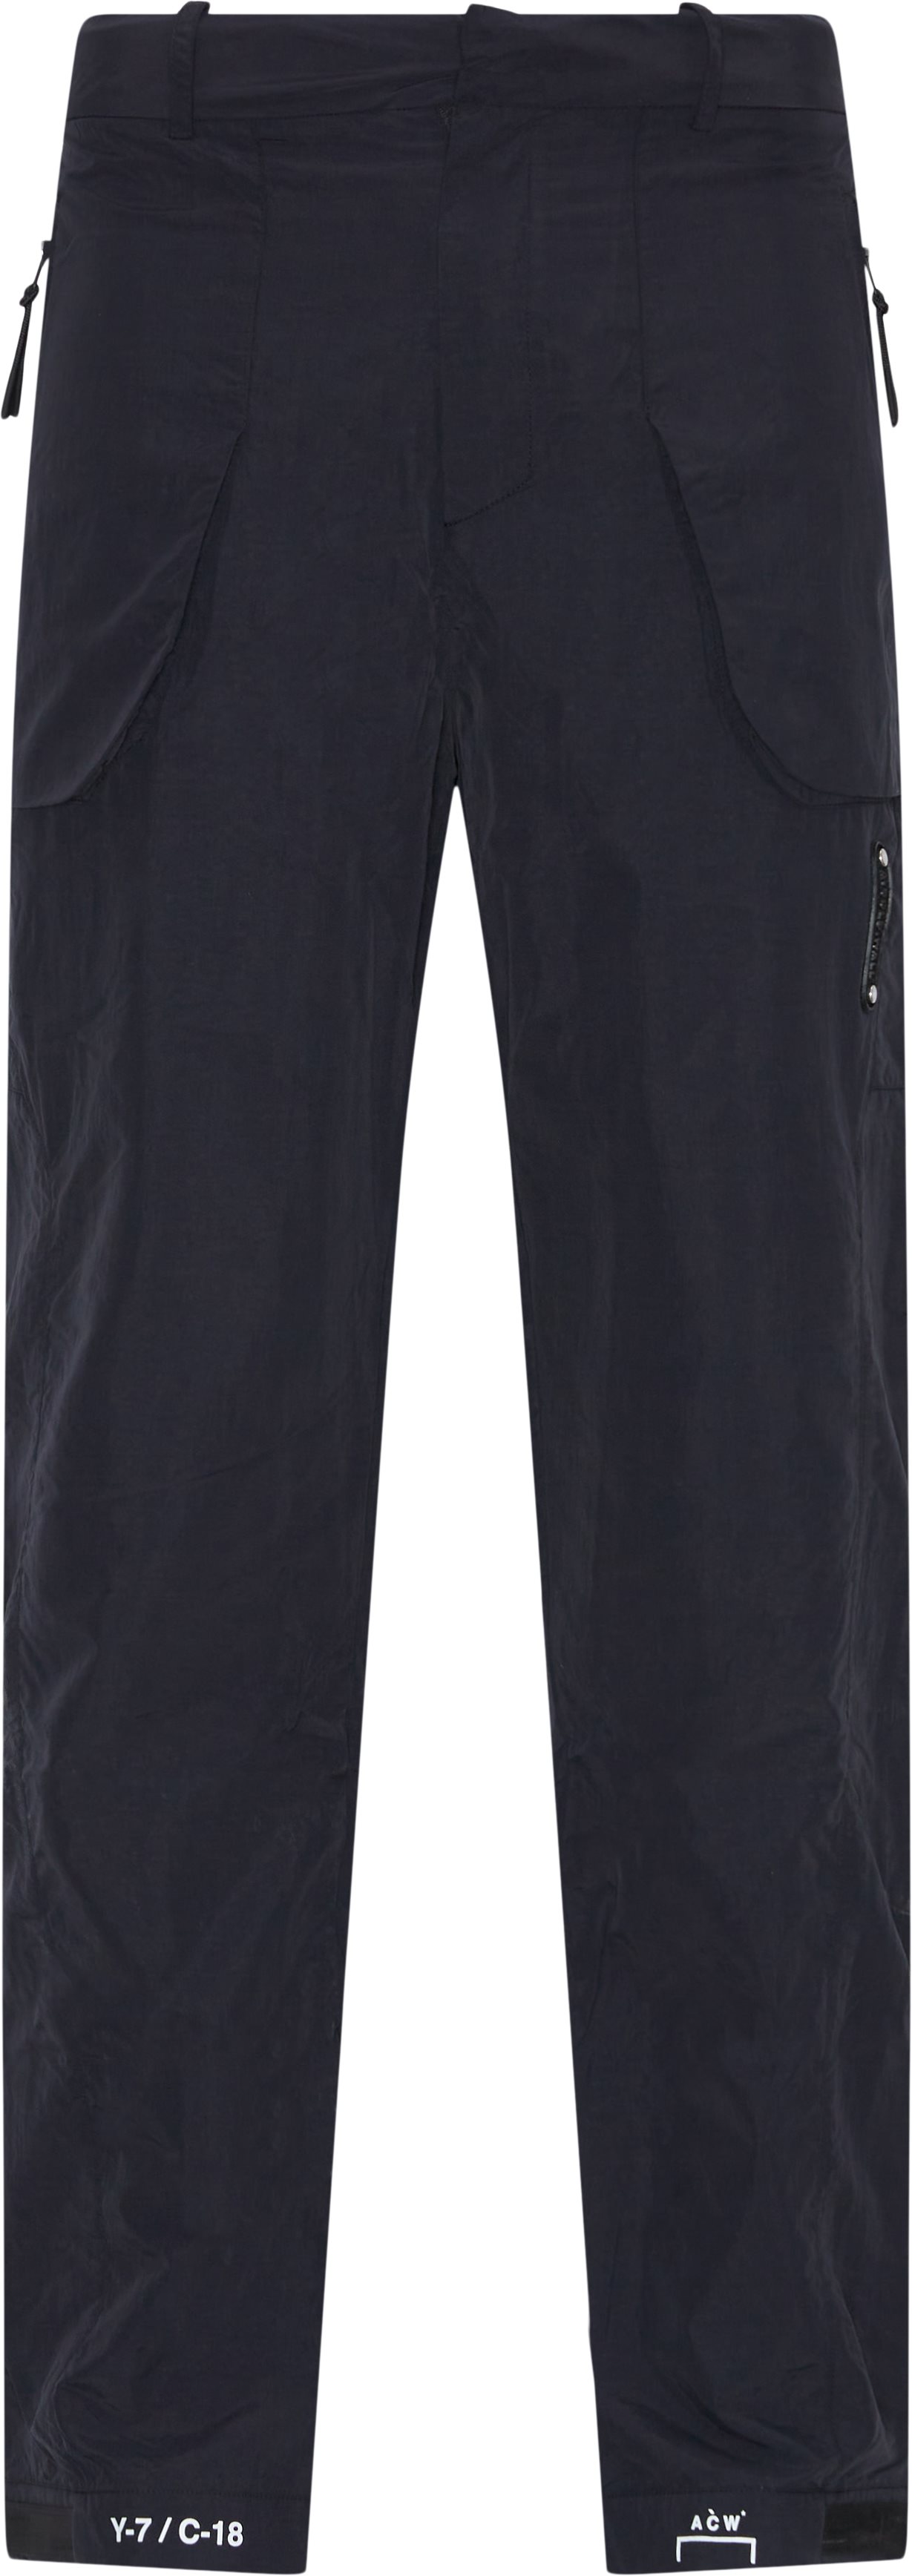 A-COLD-WALL* Trousers ACWMB182 Black